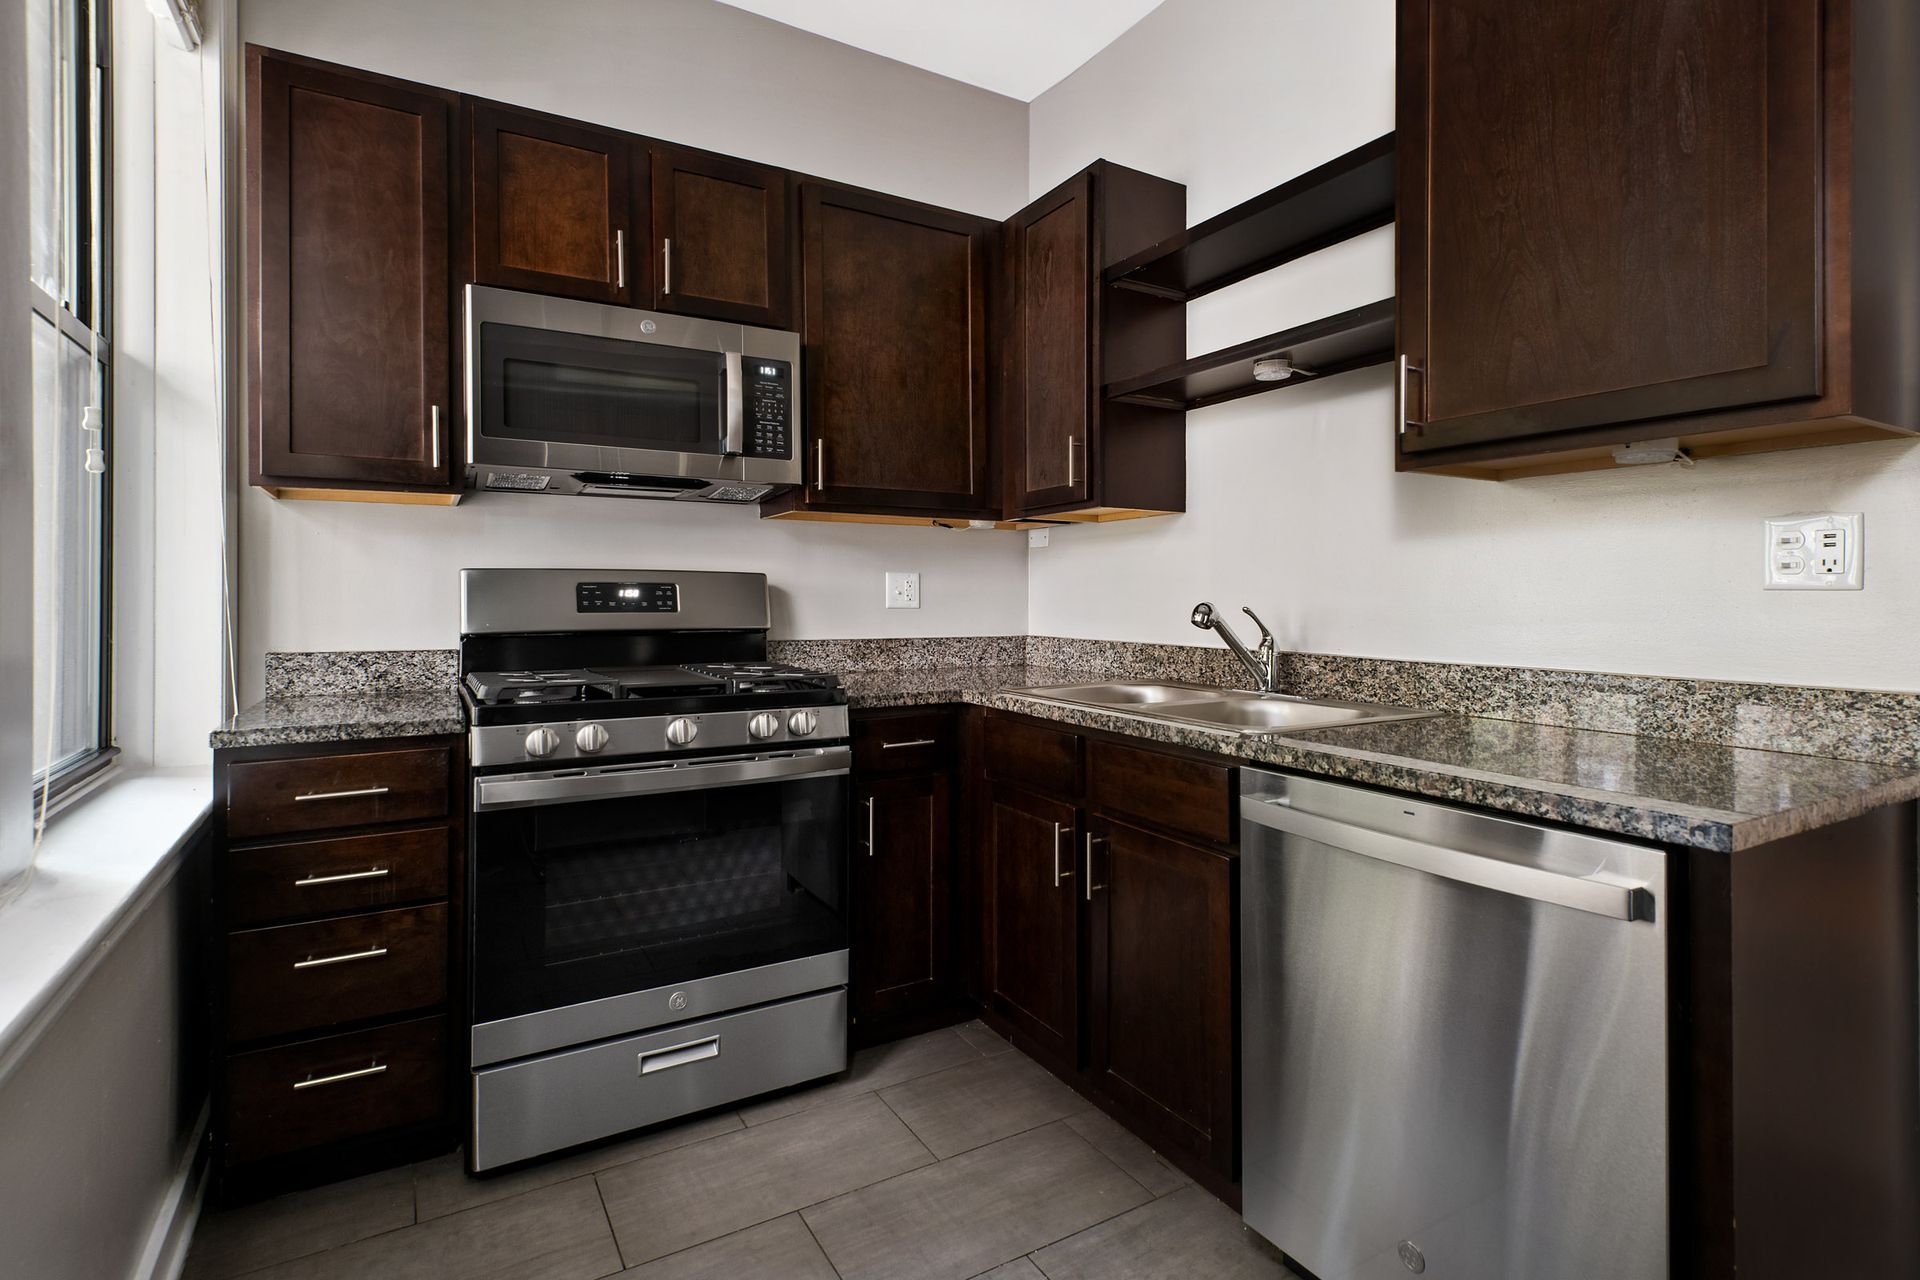 Apartment kitchen with stainless steel appliances and wooden cabinets at 429 W Melrose Street.